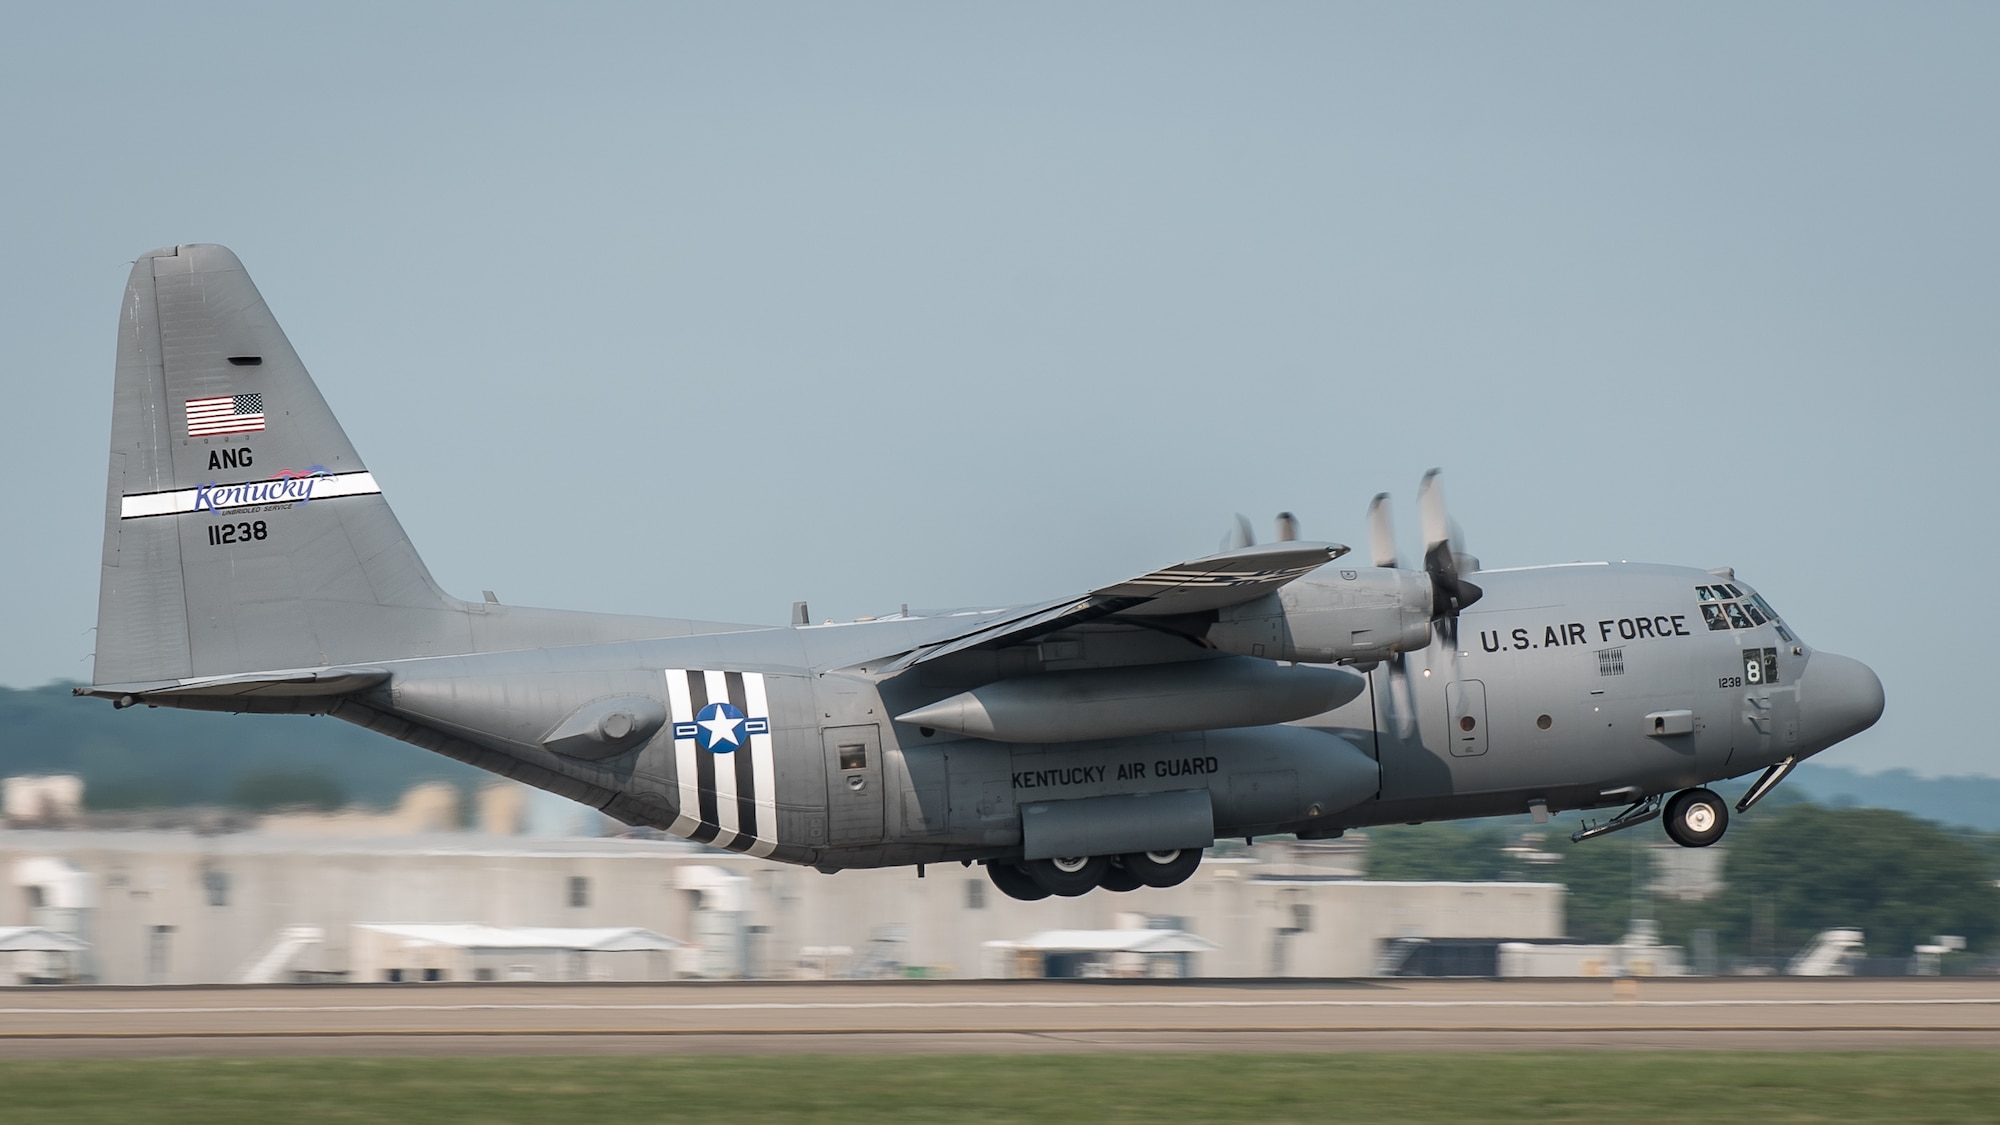 A 123rd Airlift Wing C-130 Hercules takes off from the Kentucky Air National Guard base in Louisville, Ky., June 1, 2019, en route to France, where it will participate in the 75th-anniversary reenactment of D-Day. The aircraft, which has been striped with historically accurate Allied Forces livery, will airdrop U.S. Army paratroopers over Normandy on June 9 as part of the commemoration. The D-Day invasion, formally known as Operation Overlord, turned the tide of World War II in the European theater. (U.S. Air National Guard photo by Dale Greer)